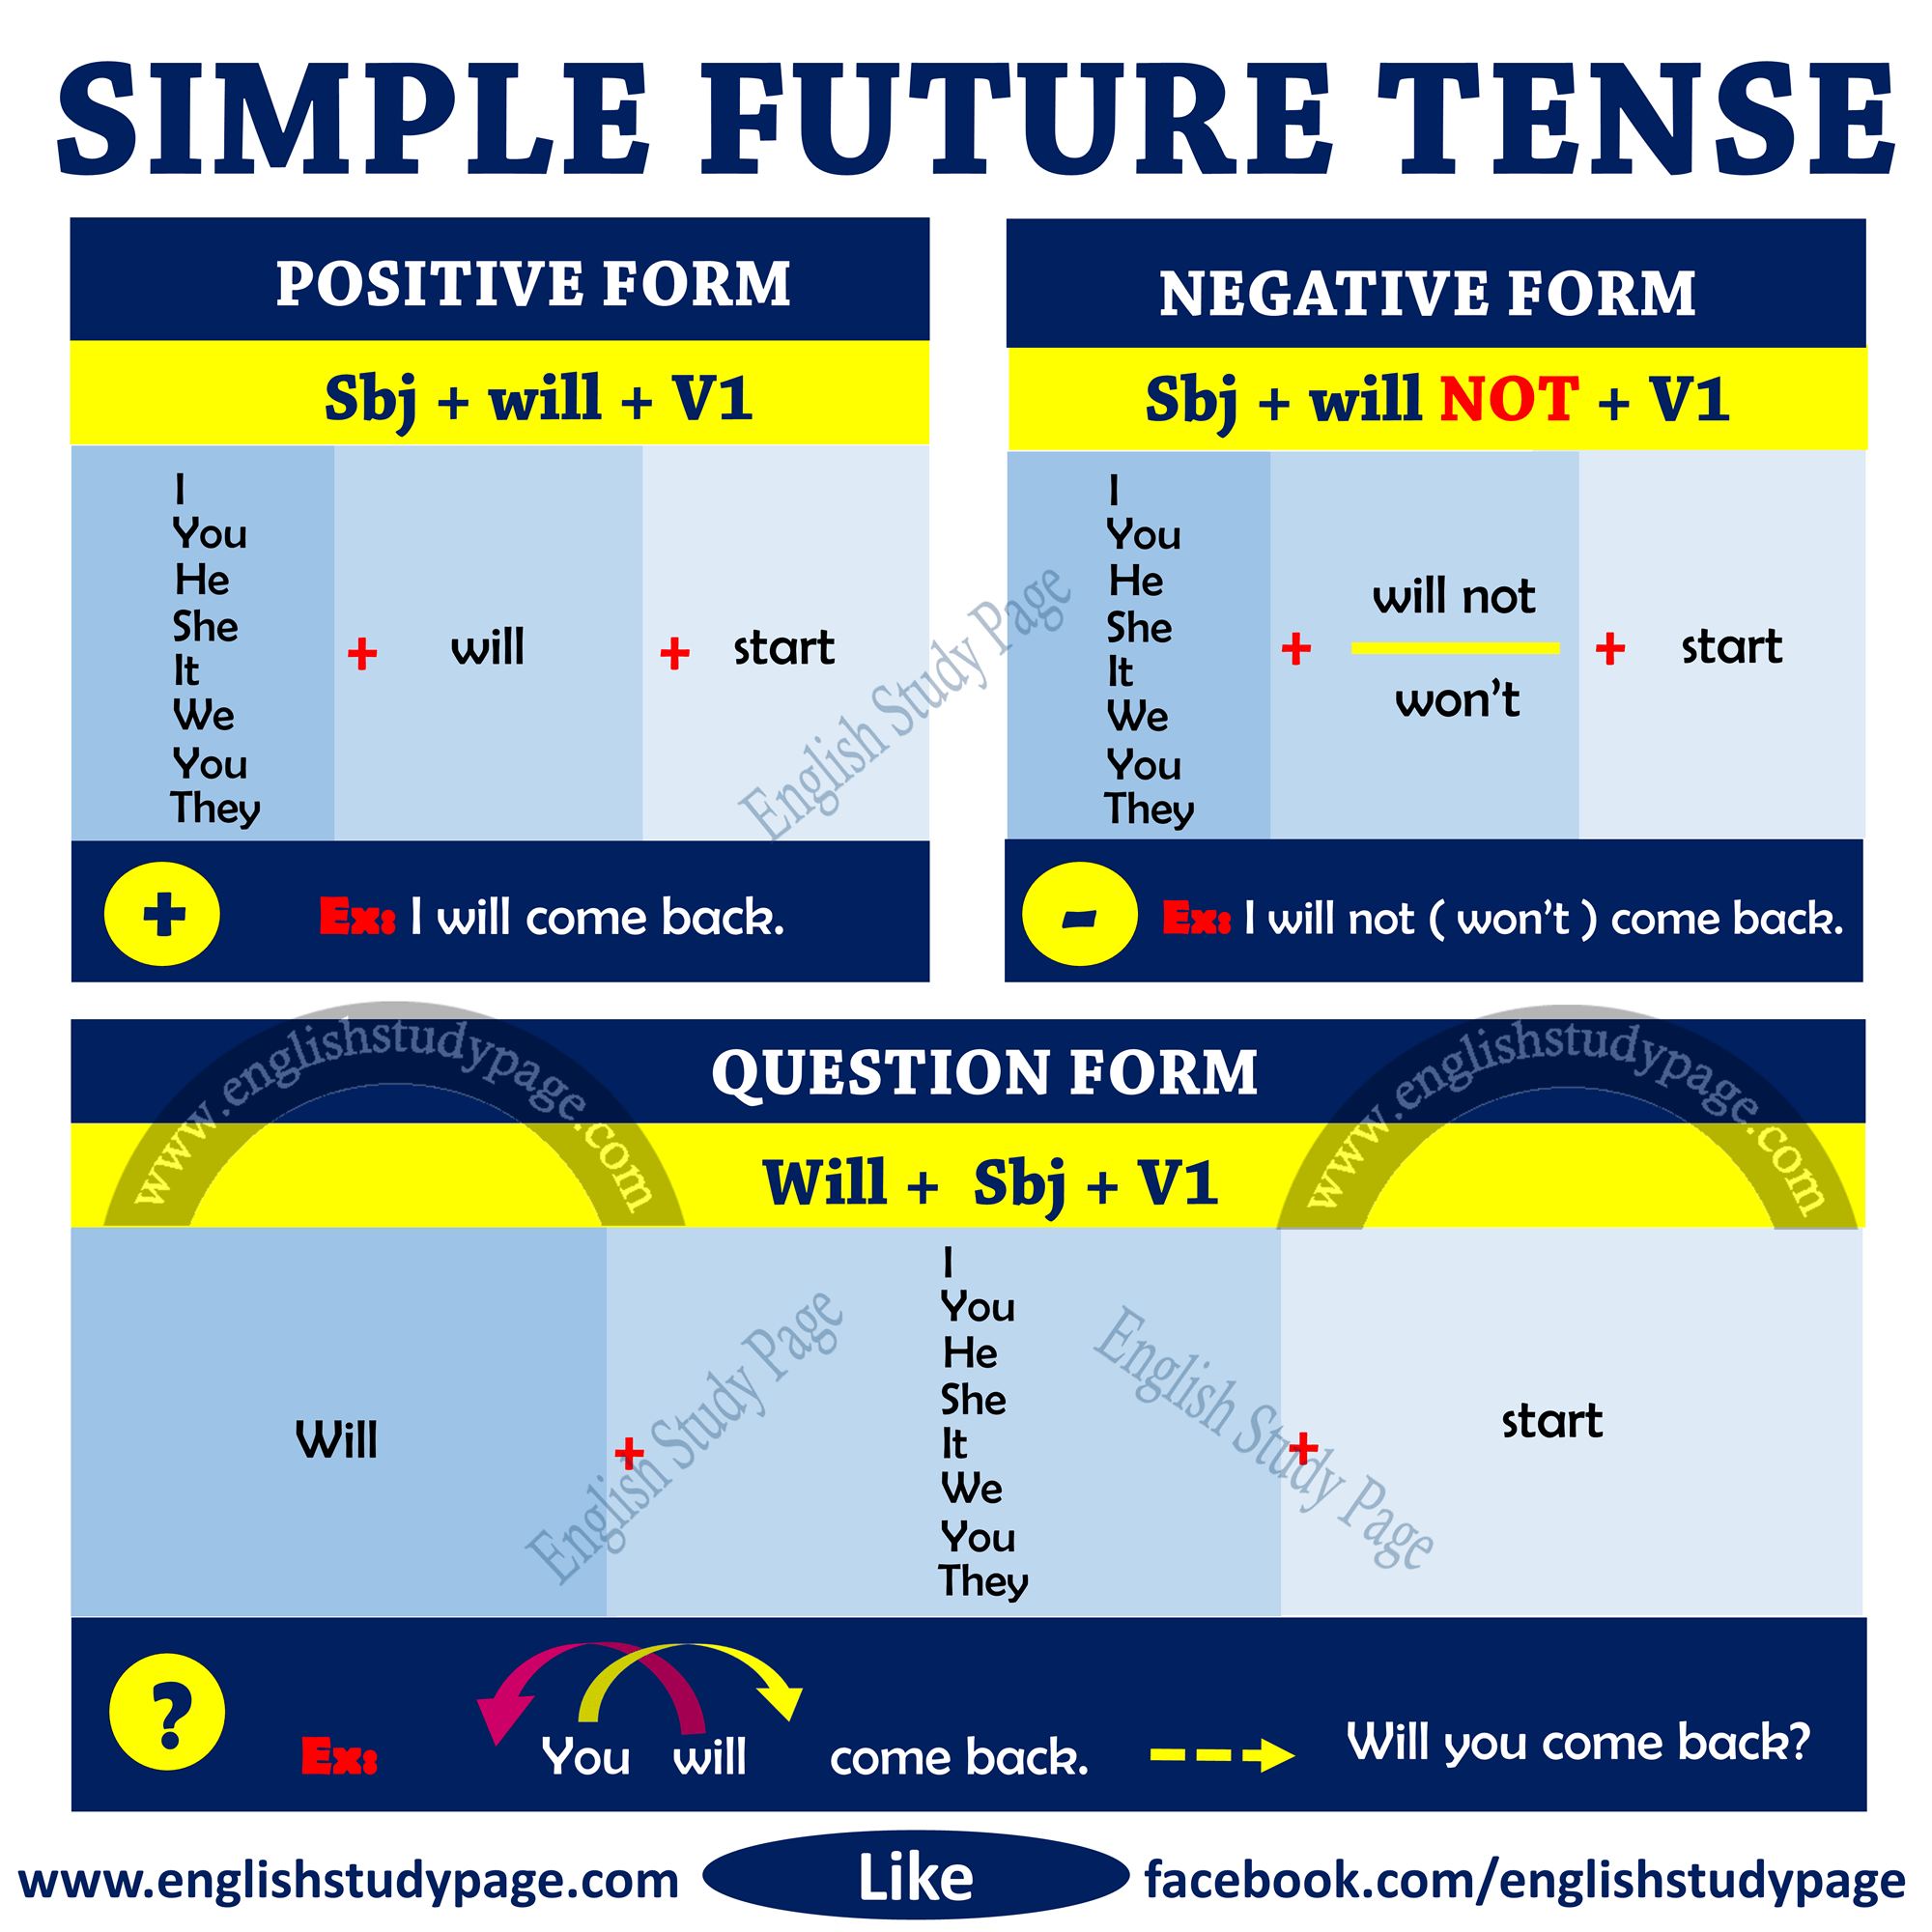 Structure of Simple Future Tense